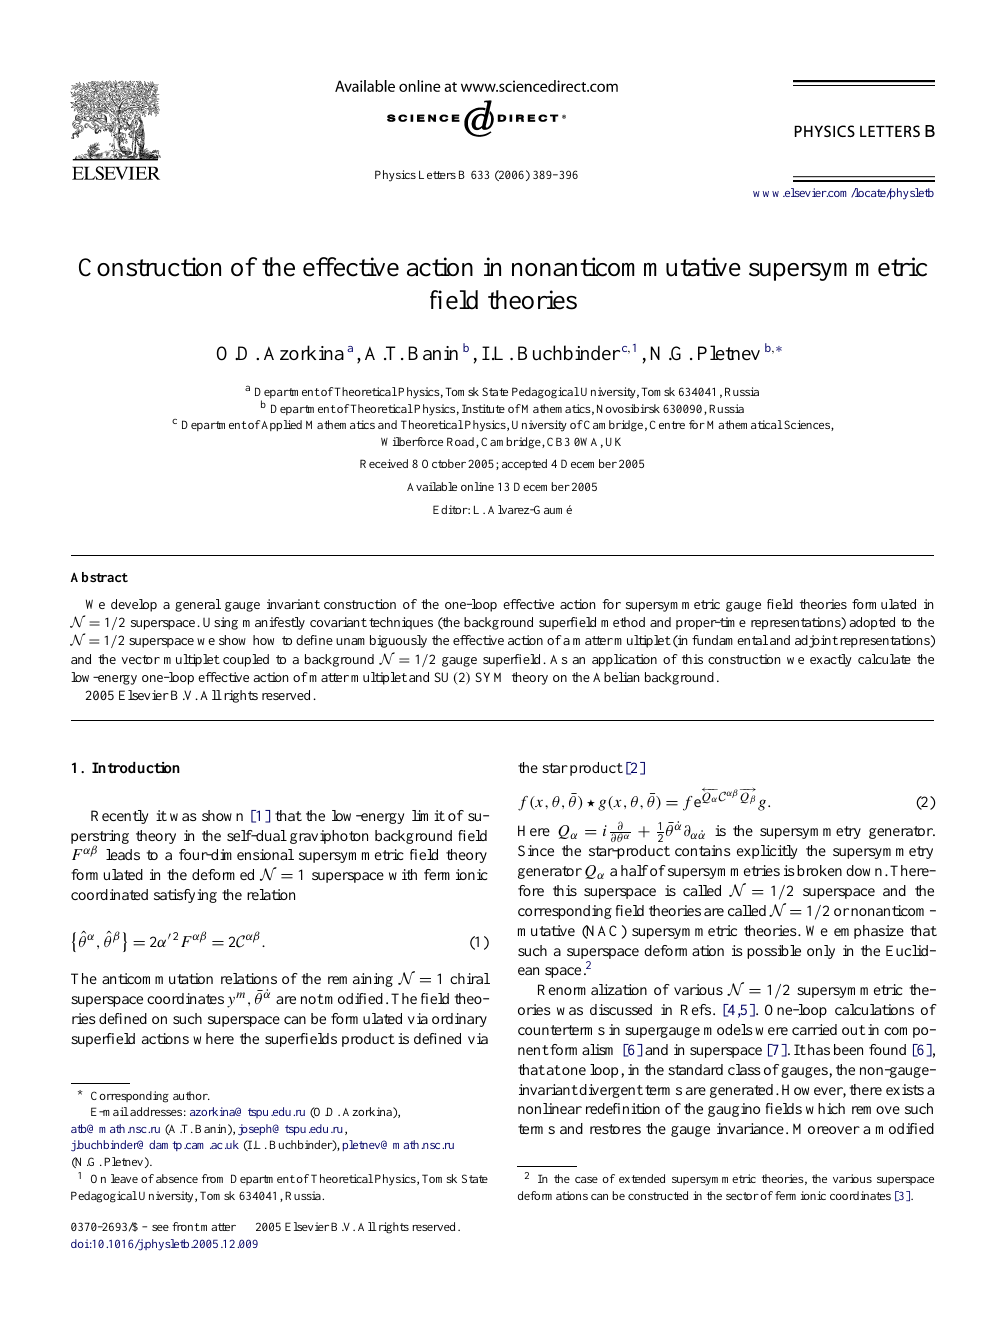 Construction Of The Effective Action In Nonanticommutative Supersymmetric Field Theories Topic Of Research Paper In Physical Sciences Download Scholarly Article Pdf And Read For Free On Cyberleninka Open Science Hub